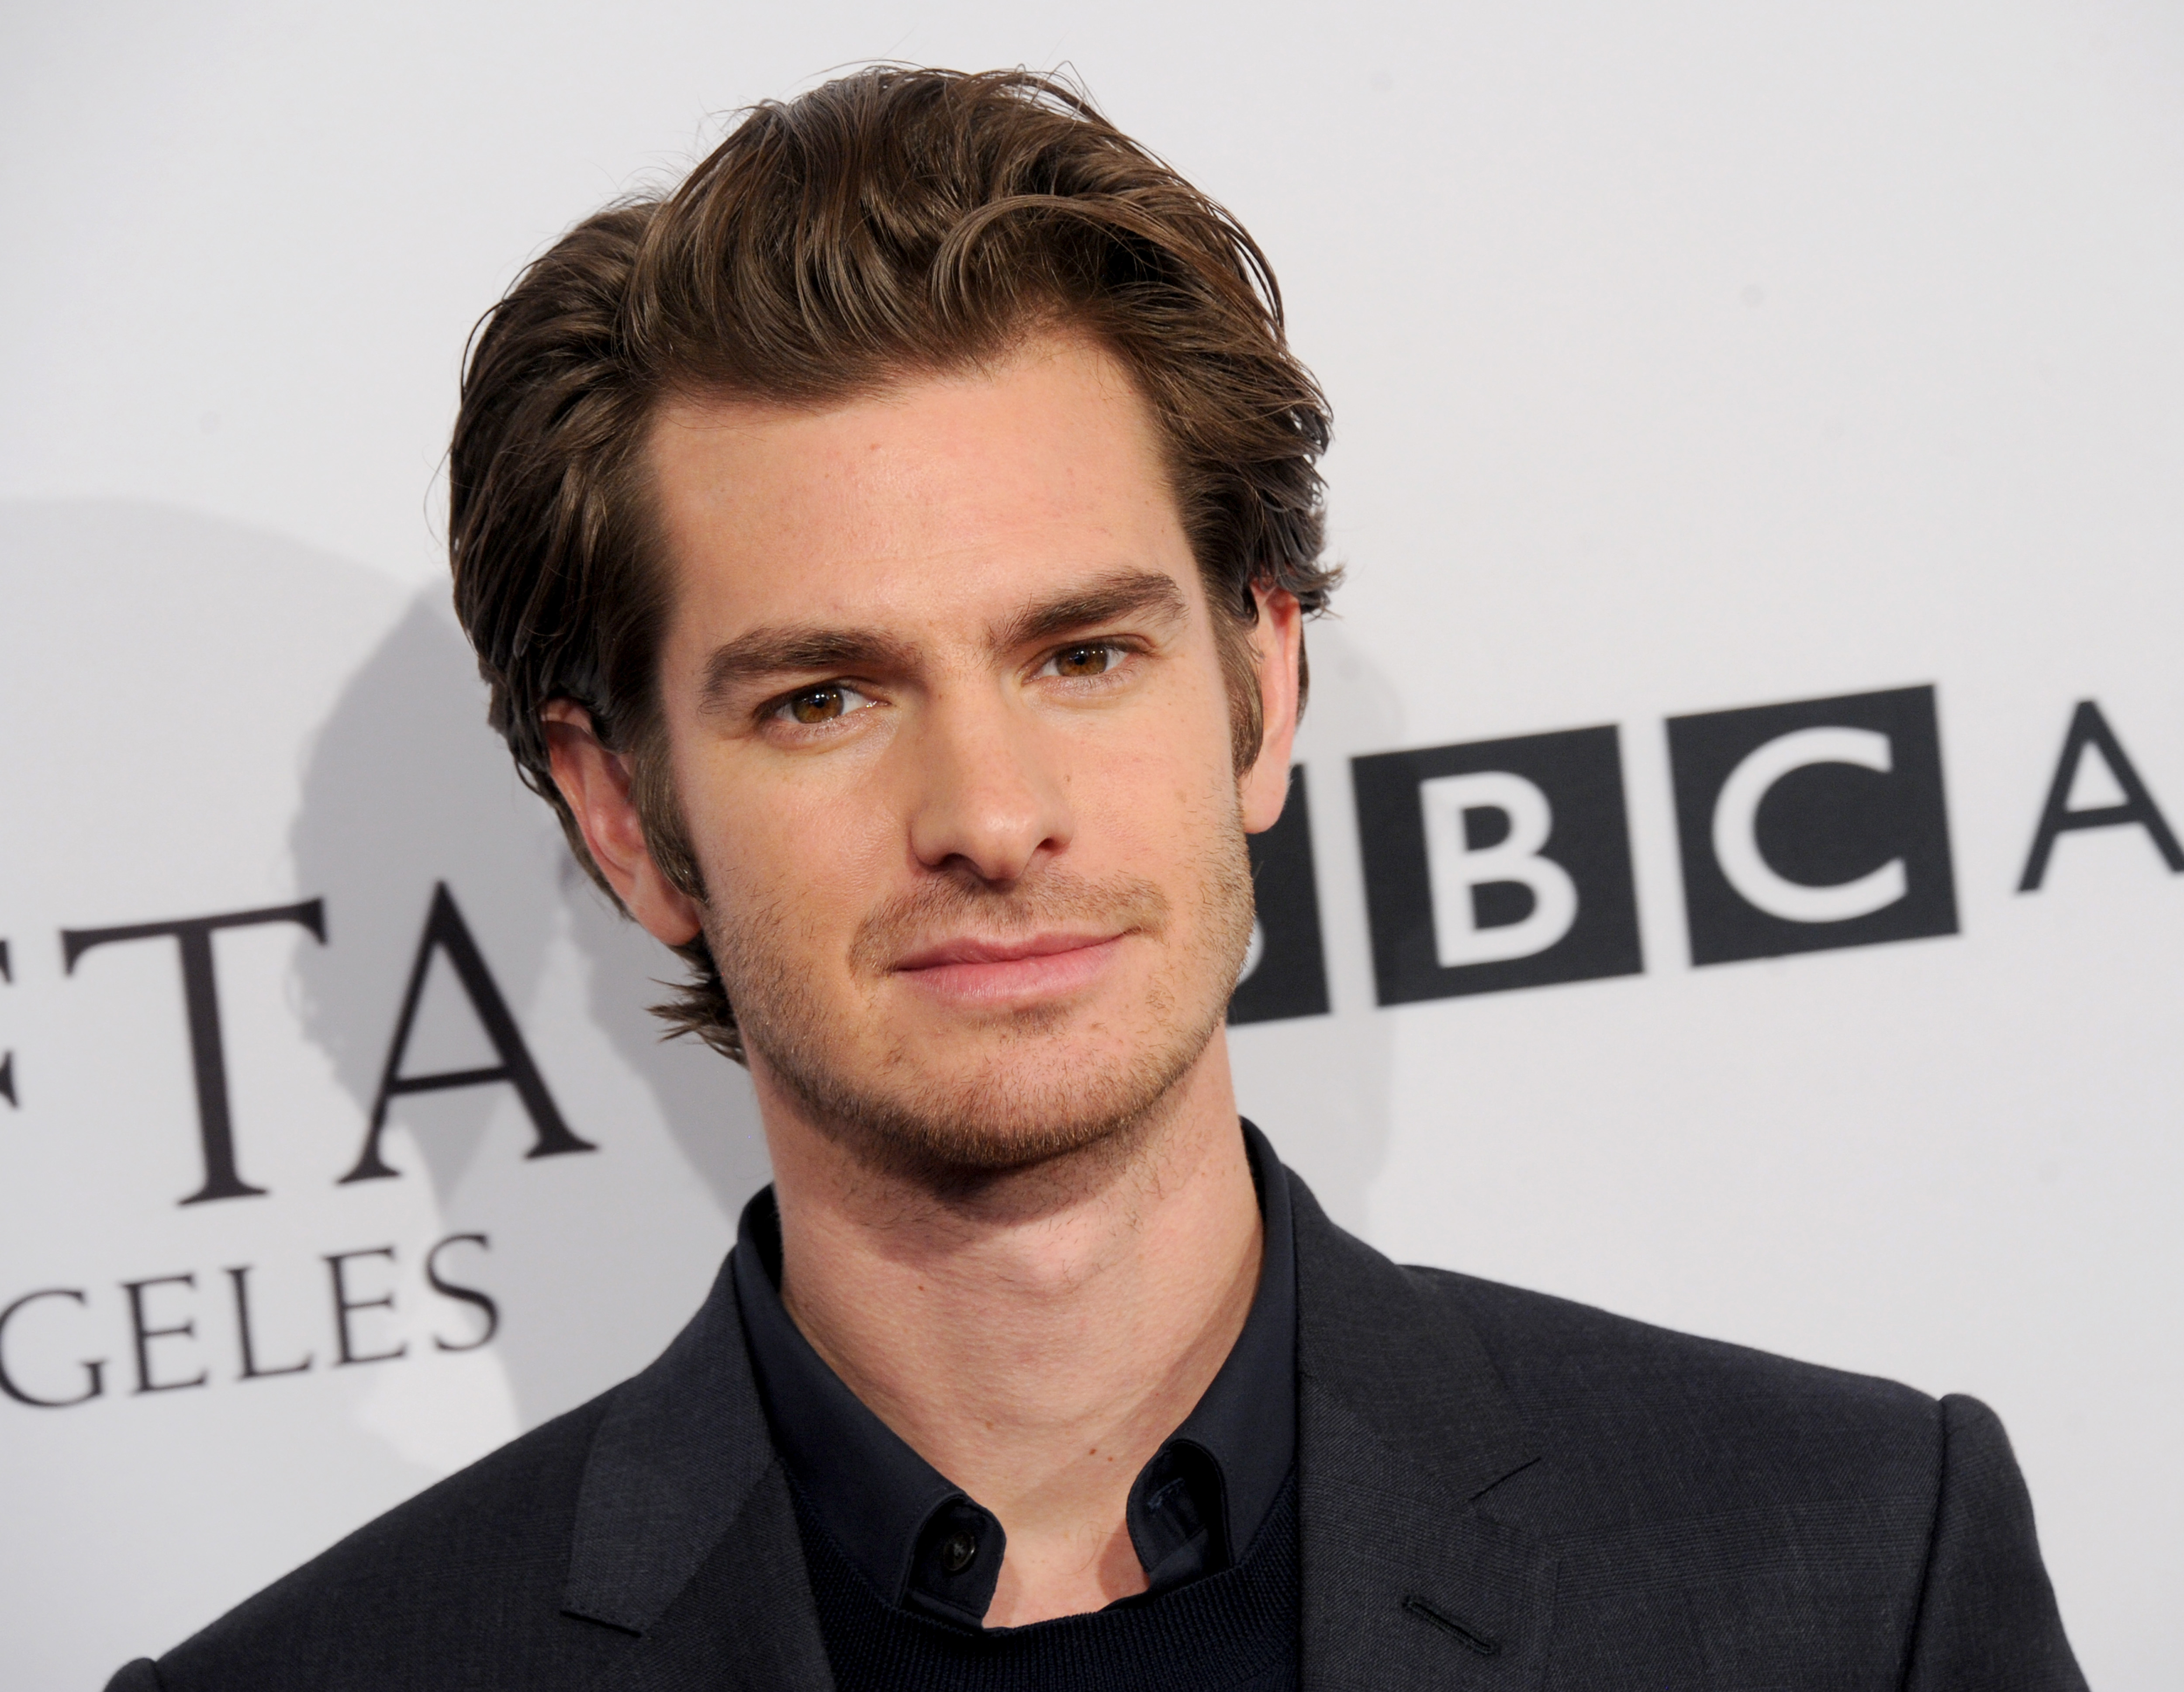 Andrew Garfield, who may be in 'Spider-Man: No Way Home' along with Tobey Maguire, wears a dark gray suit over a black button-up shirt.